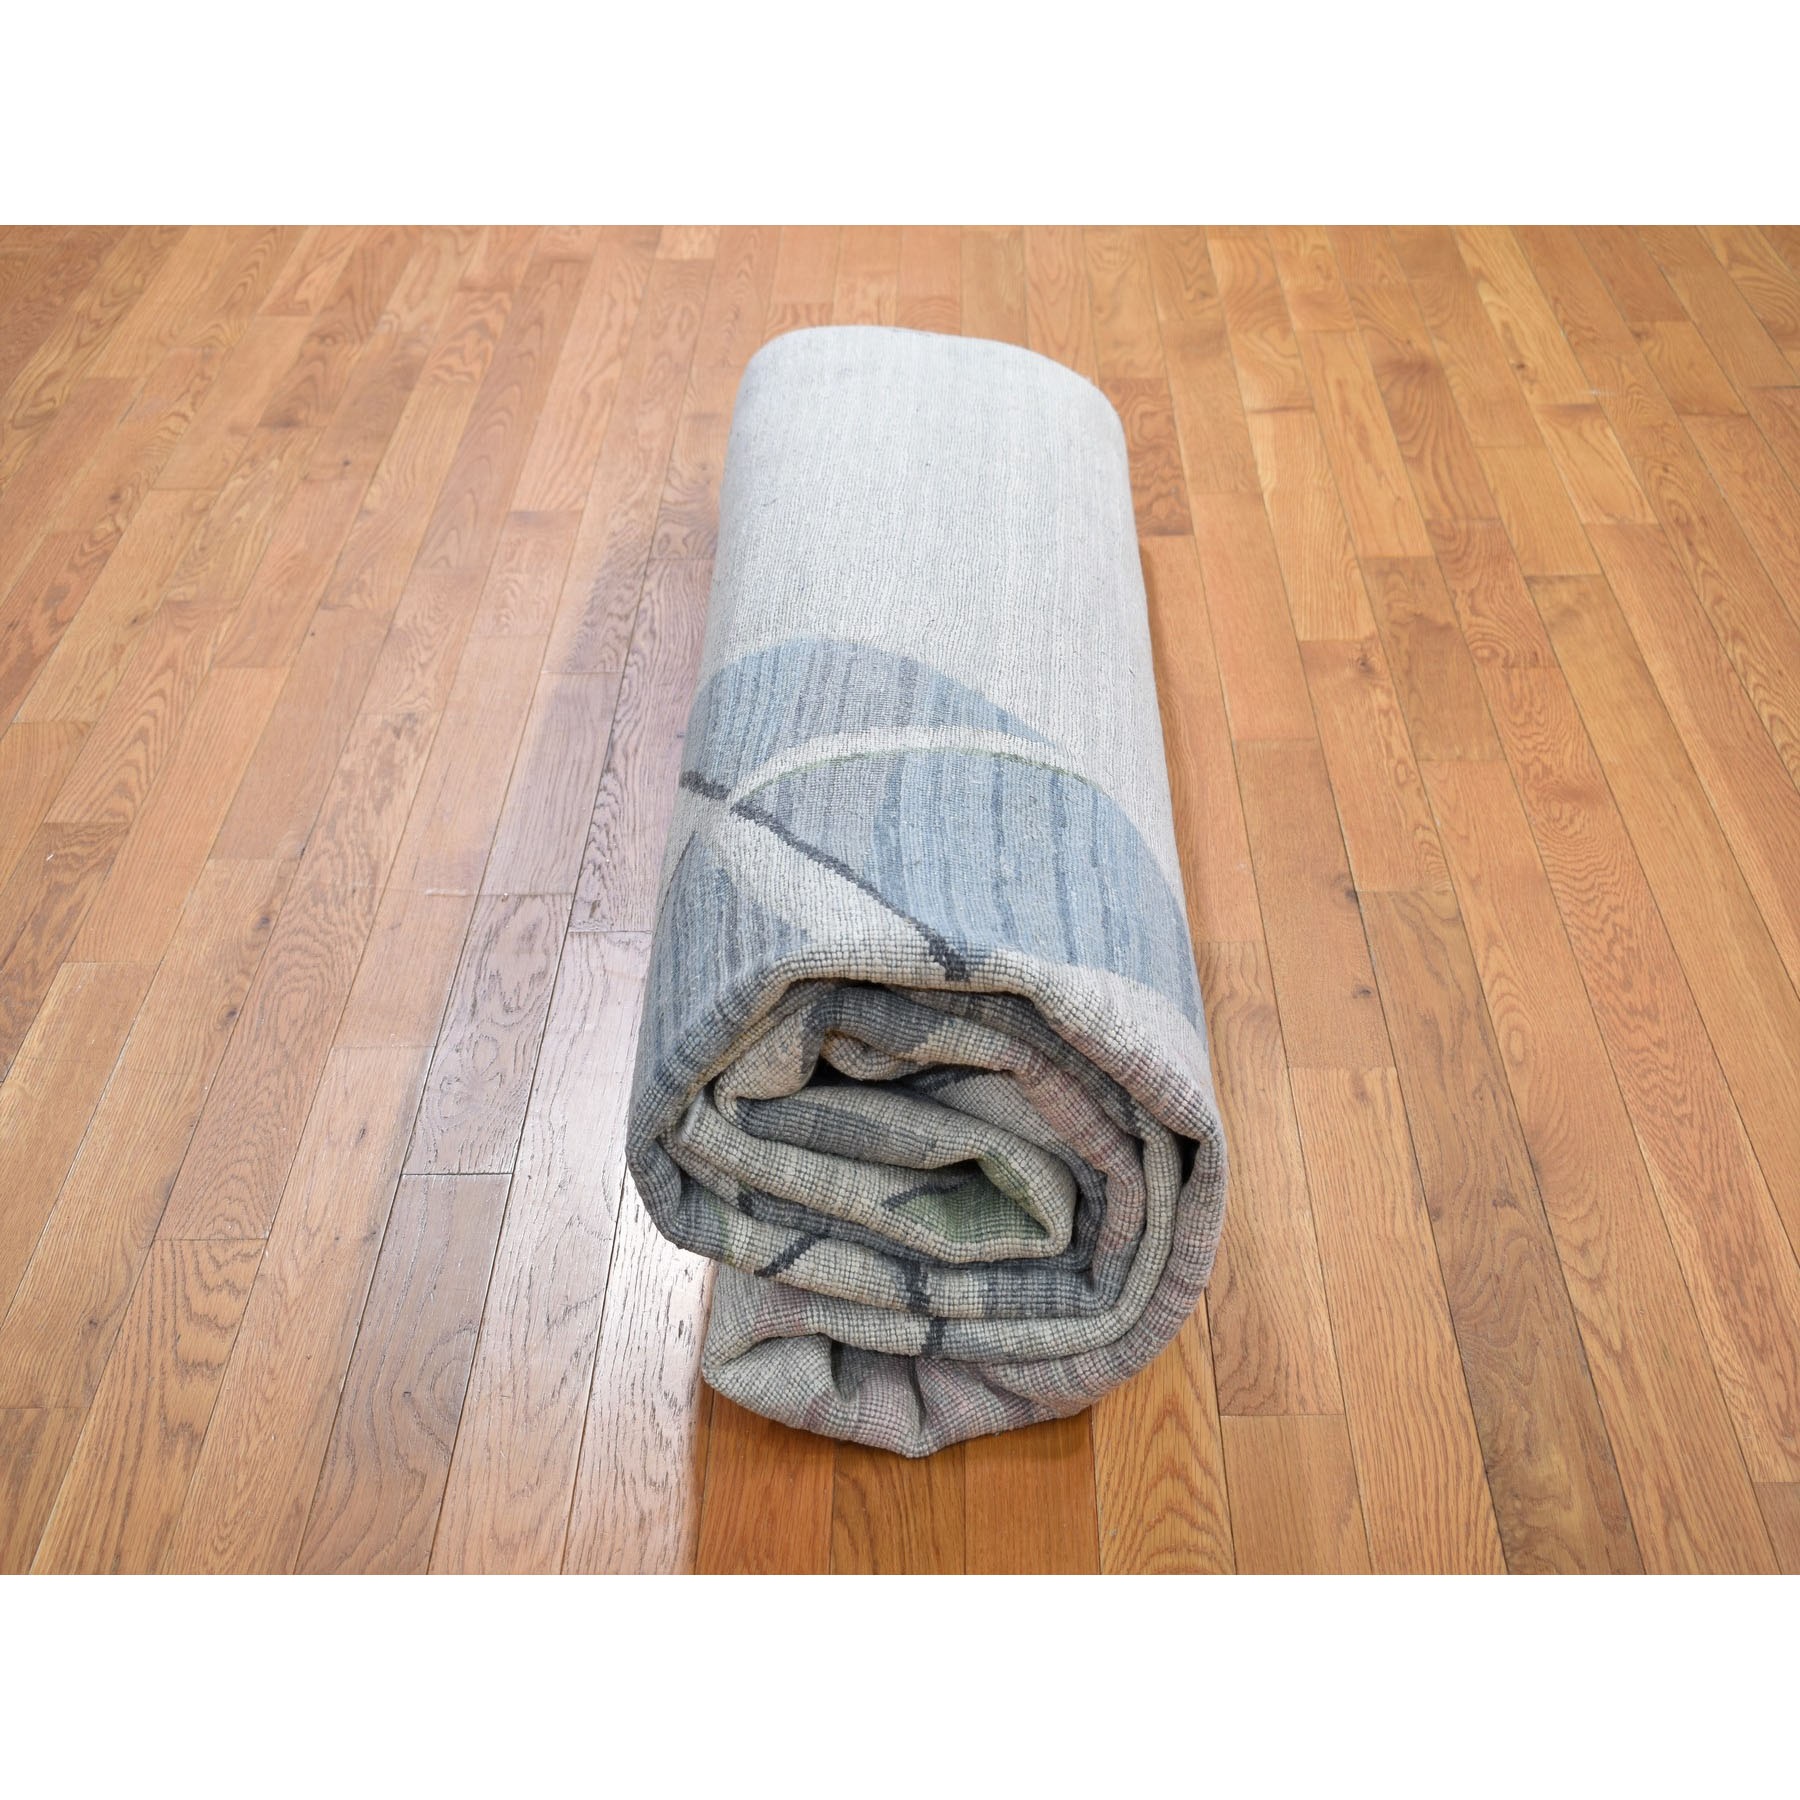 9-x12- Pastel Pure Silk With Textured Wool Hi-low Hand Knotted Oriental Rug 